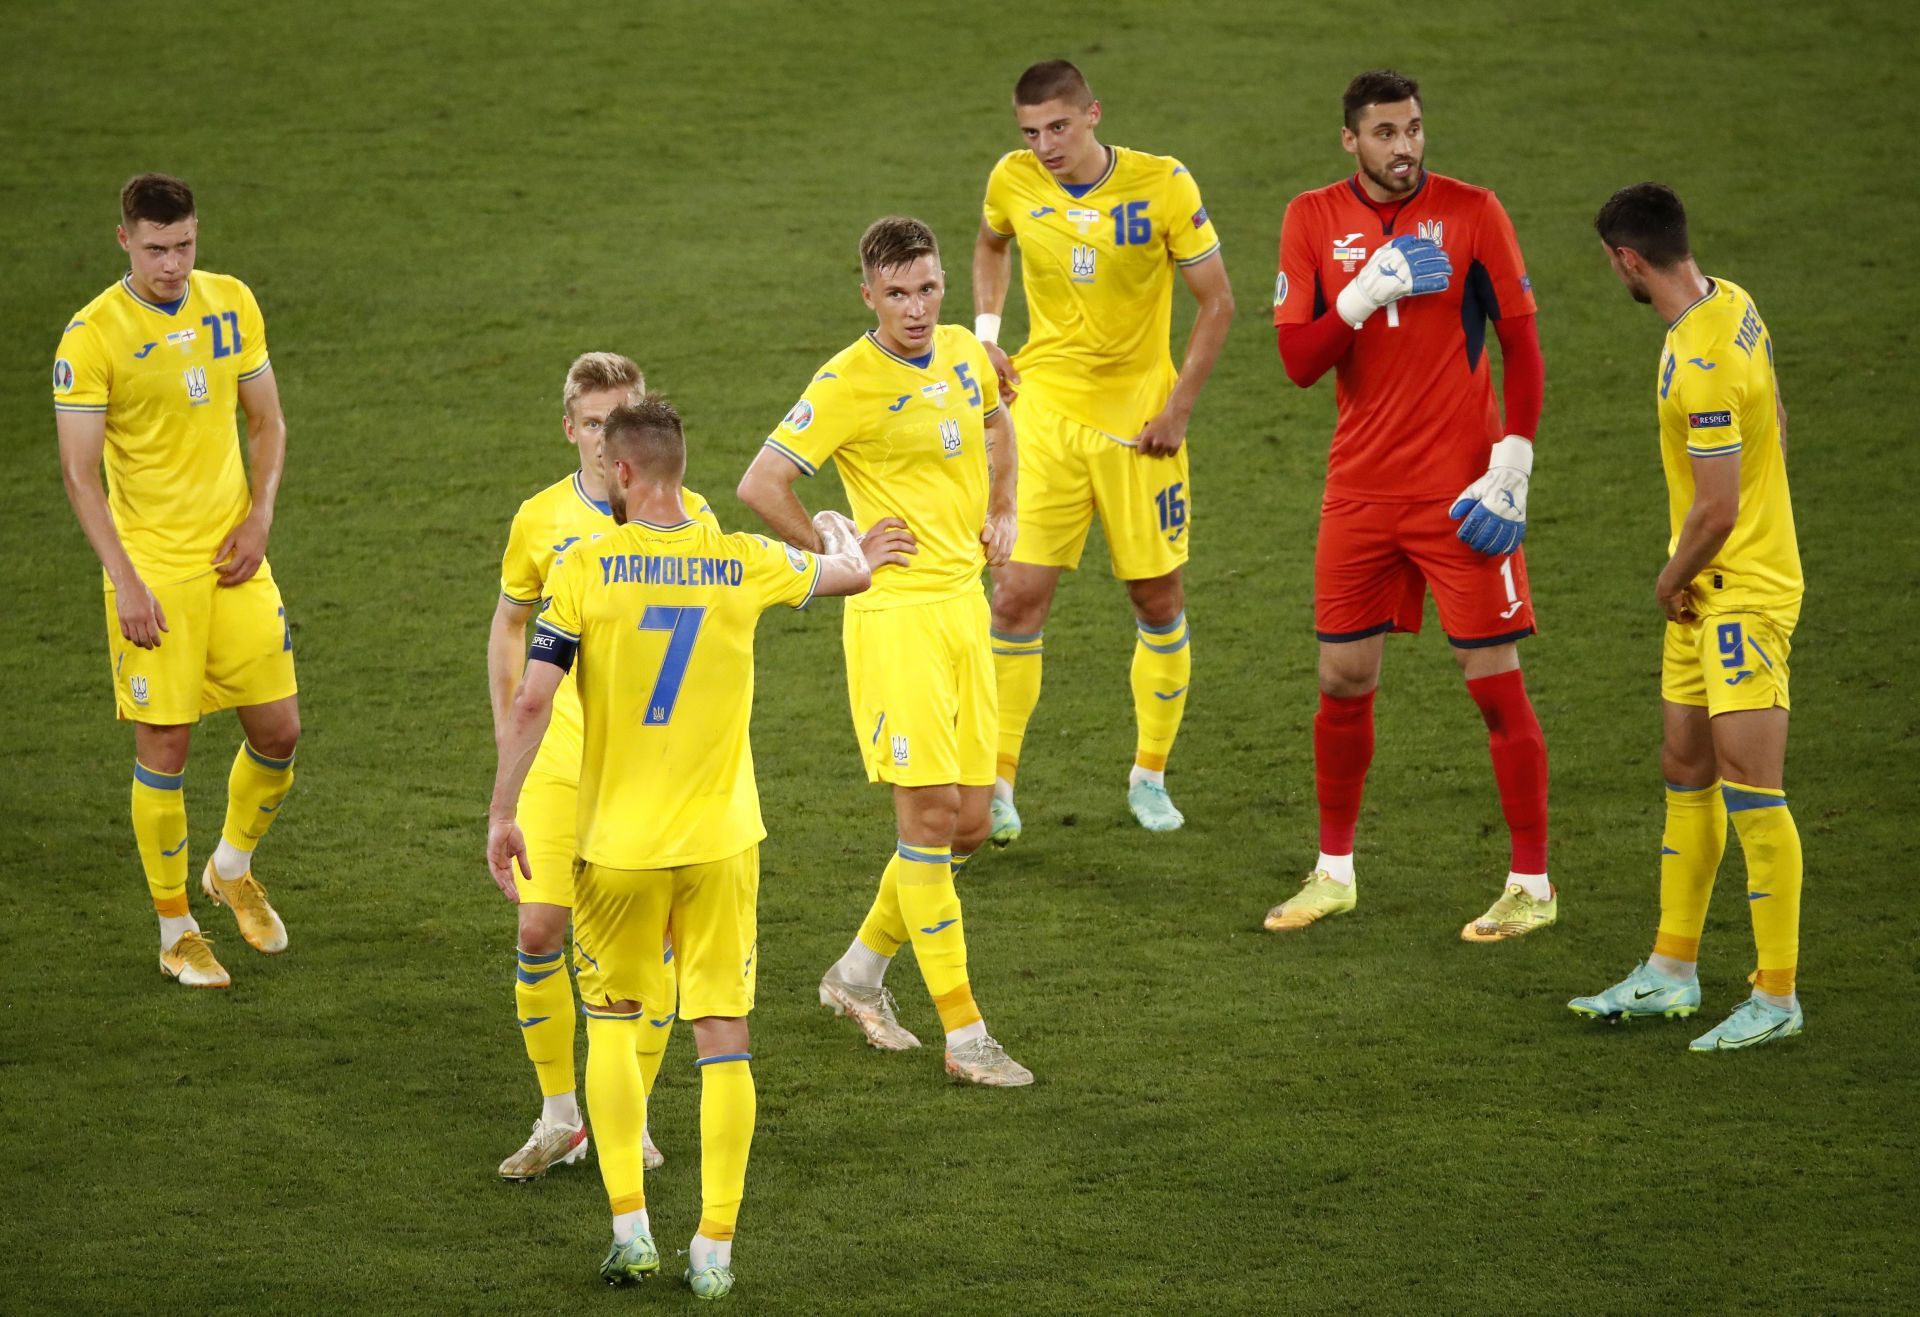 Ukraine need to win the game in order to progress